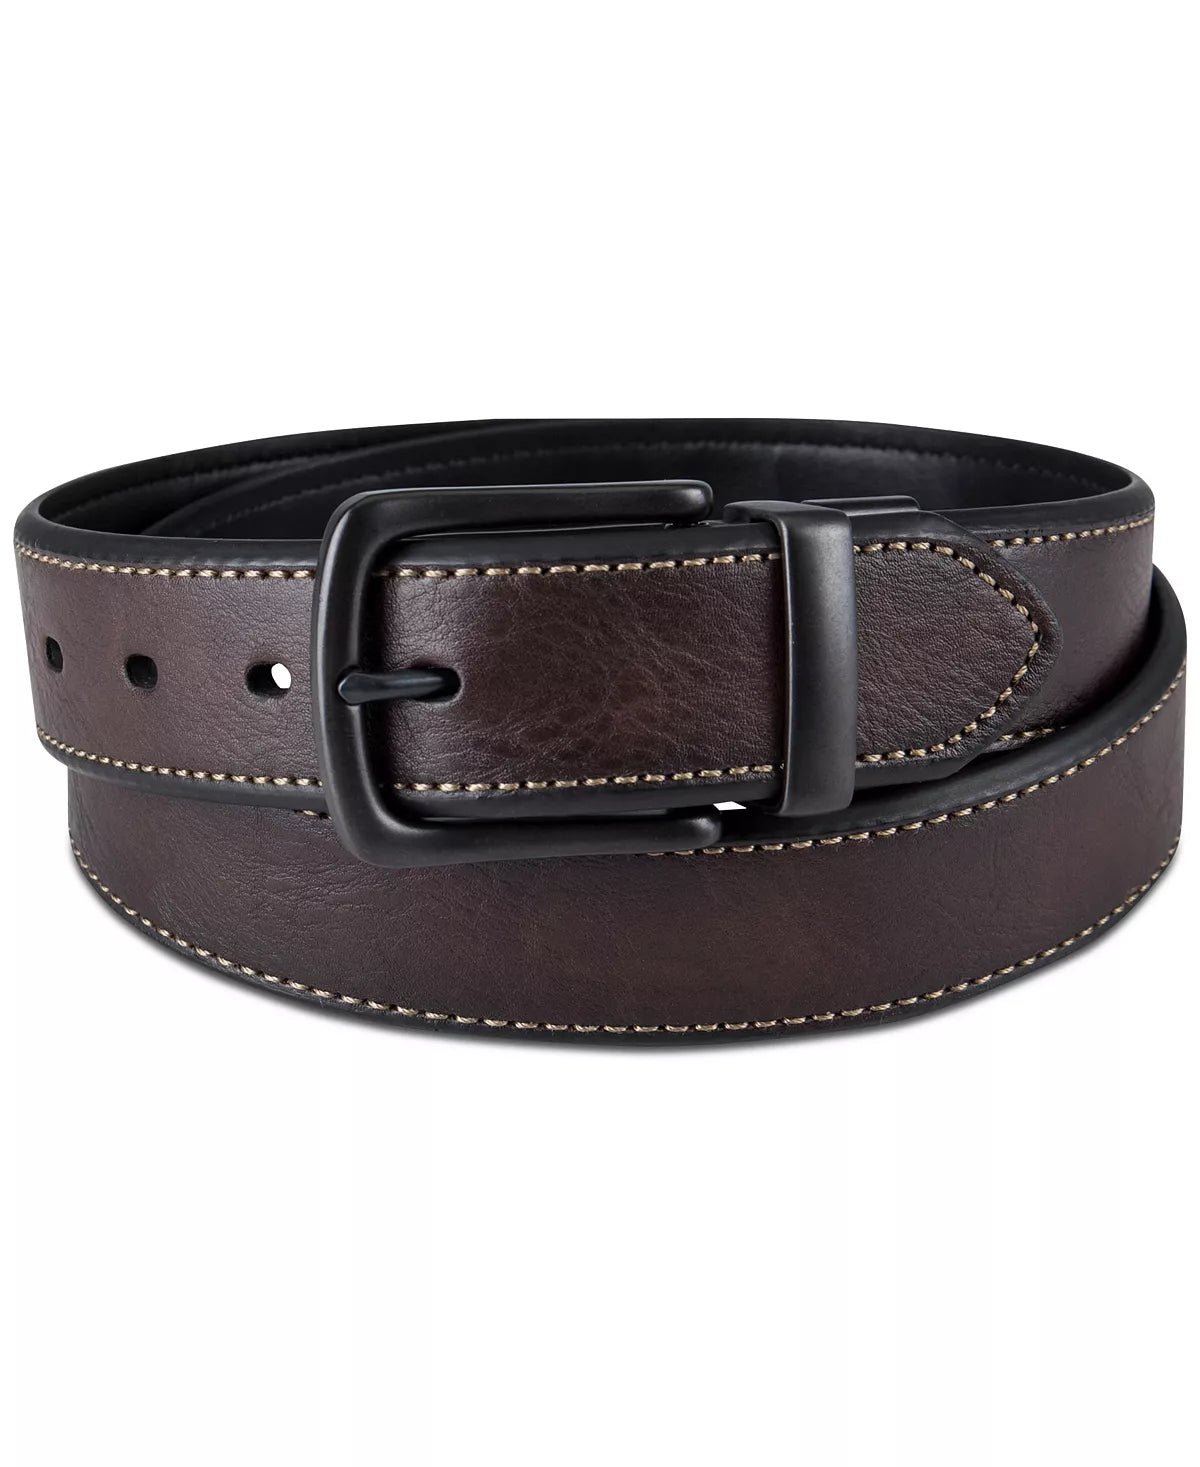 Levi's® Men's Reversible Belt with Contrast Stitching